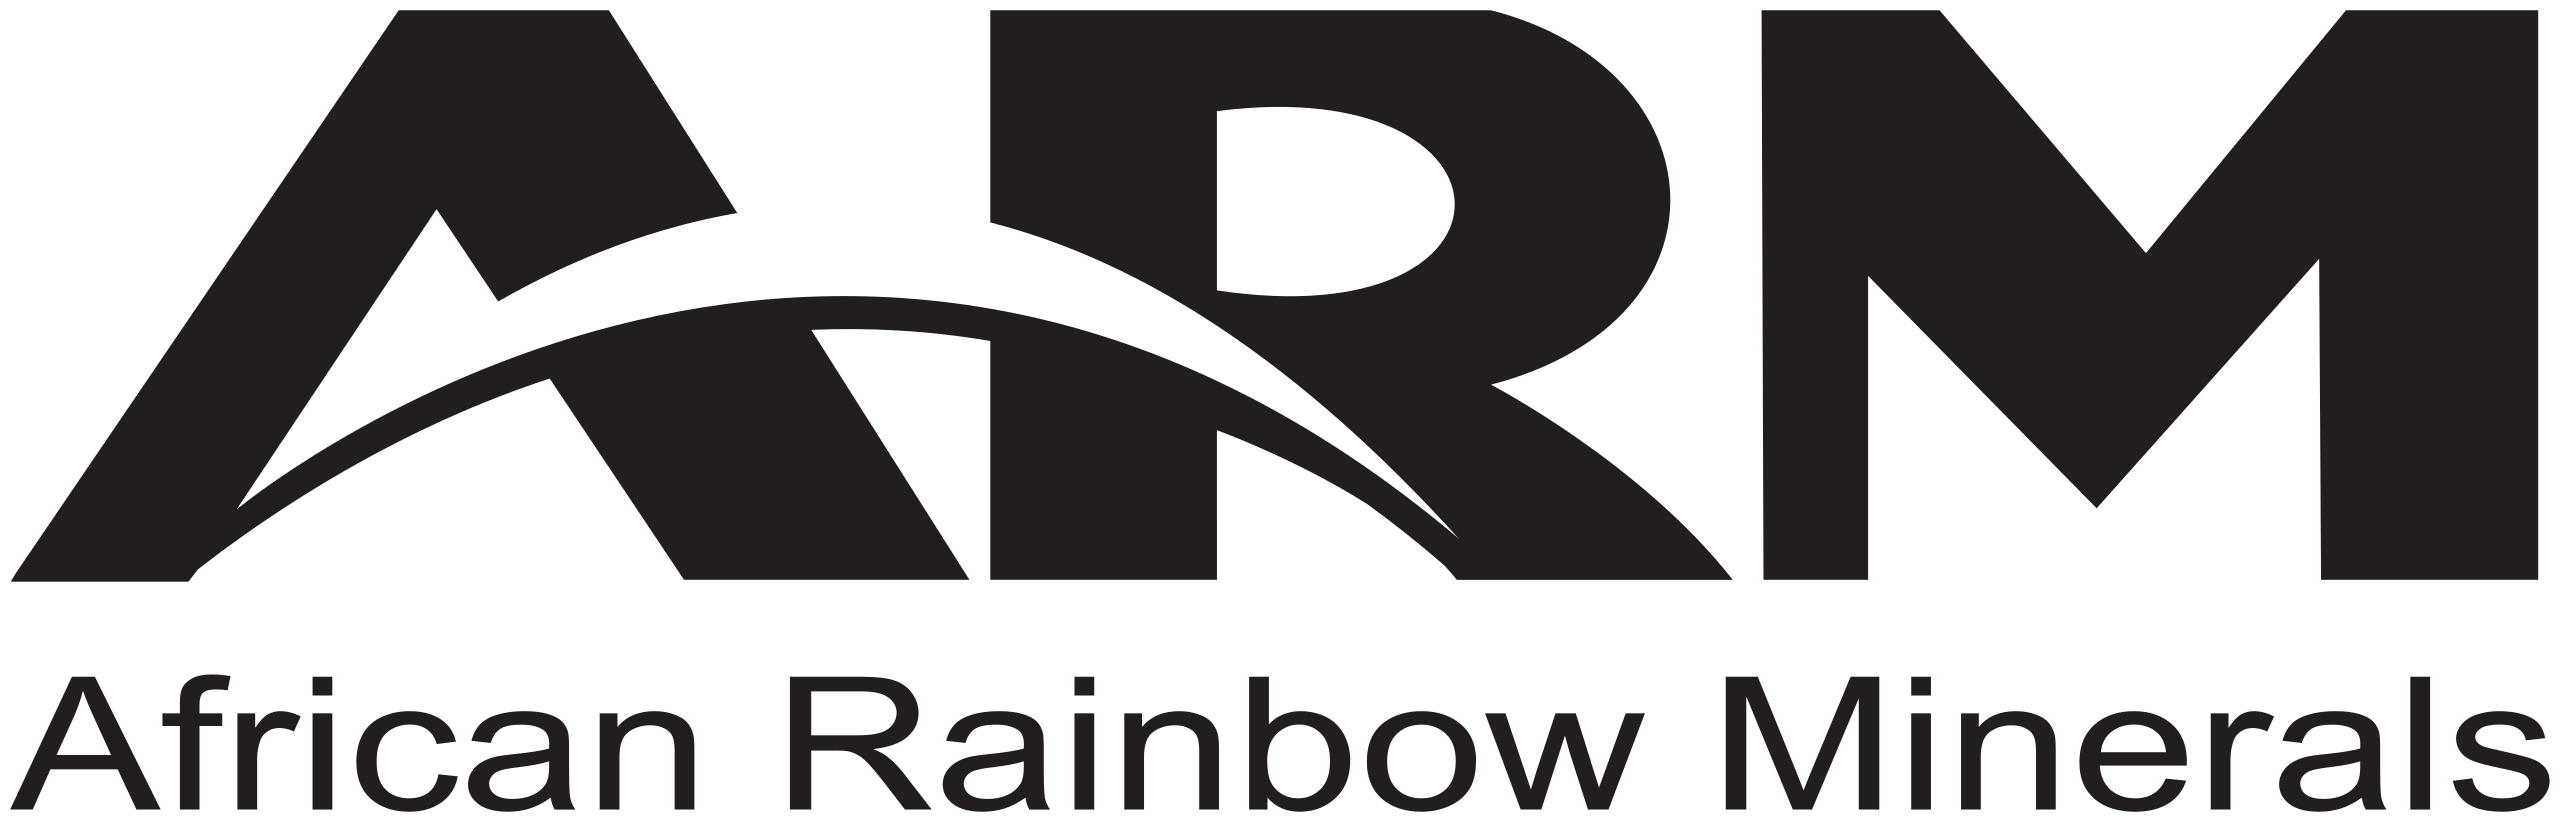 Image result for African Rainbow Minerals Ltd.